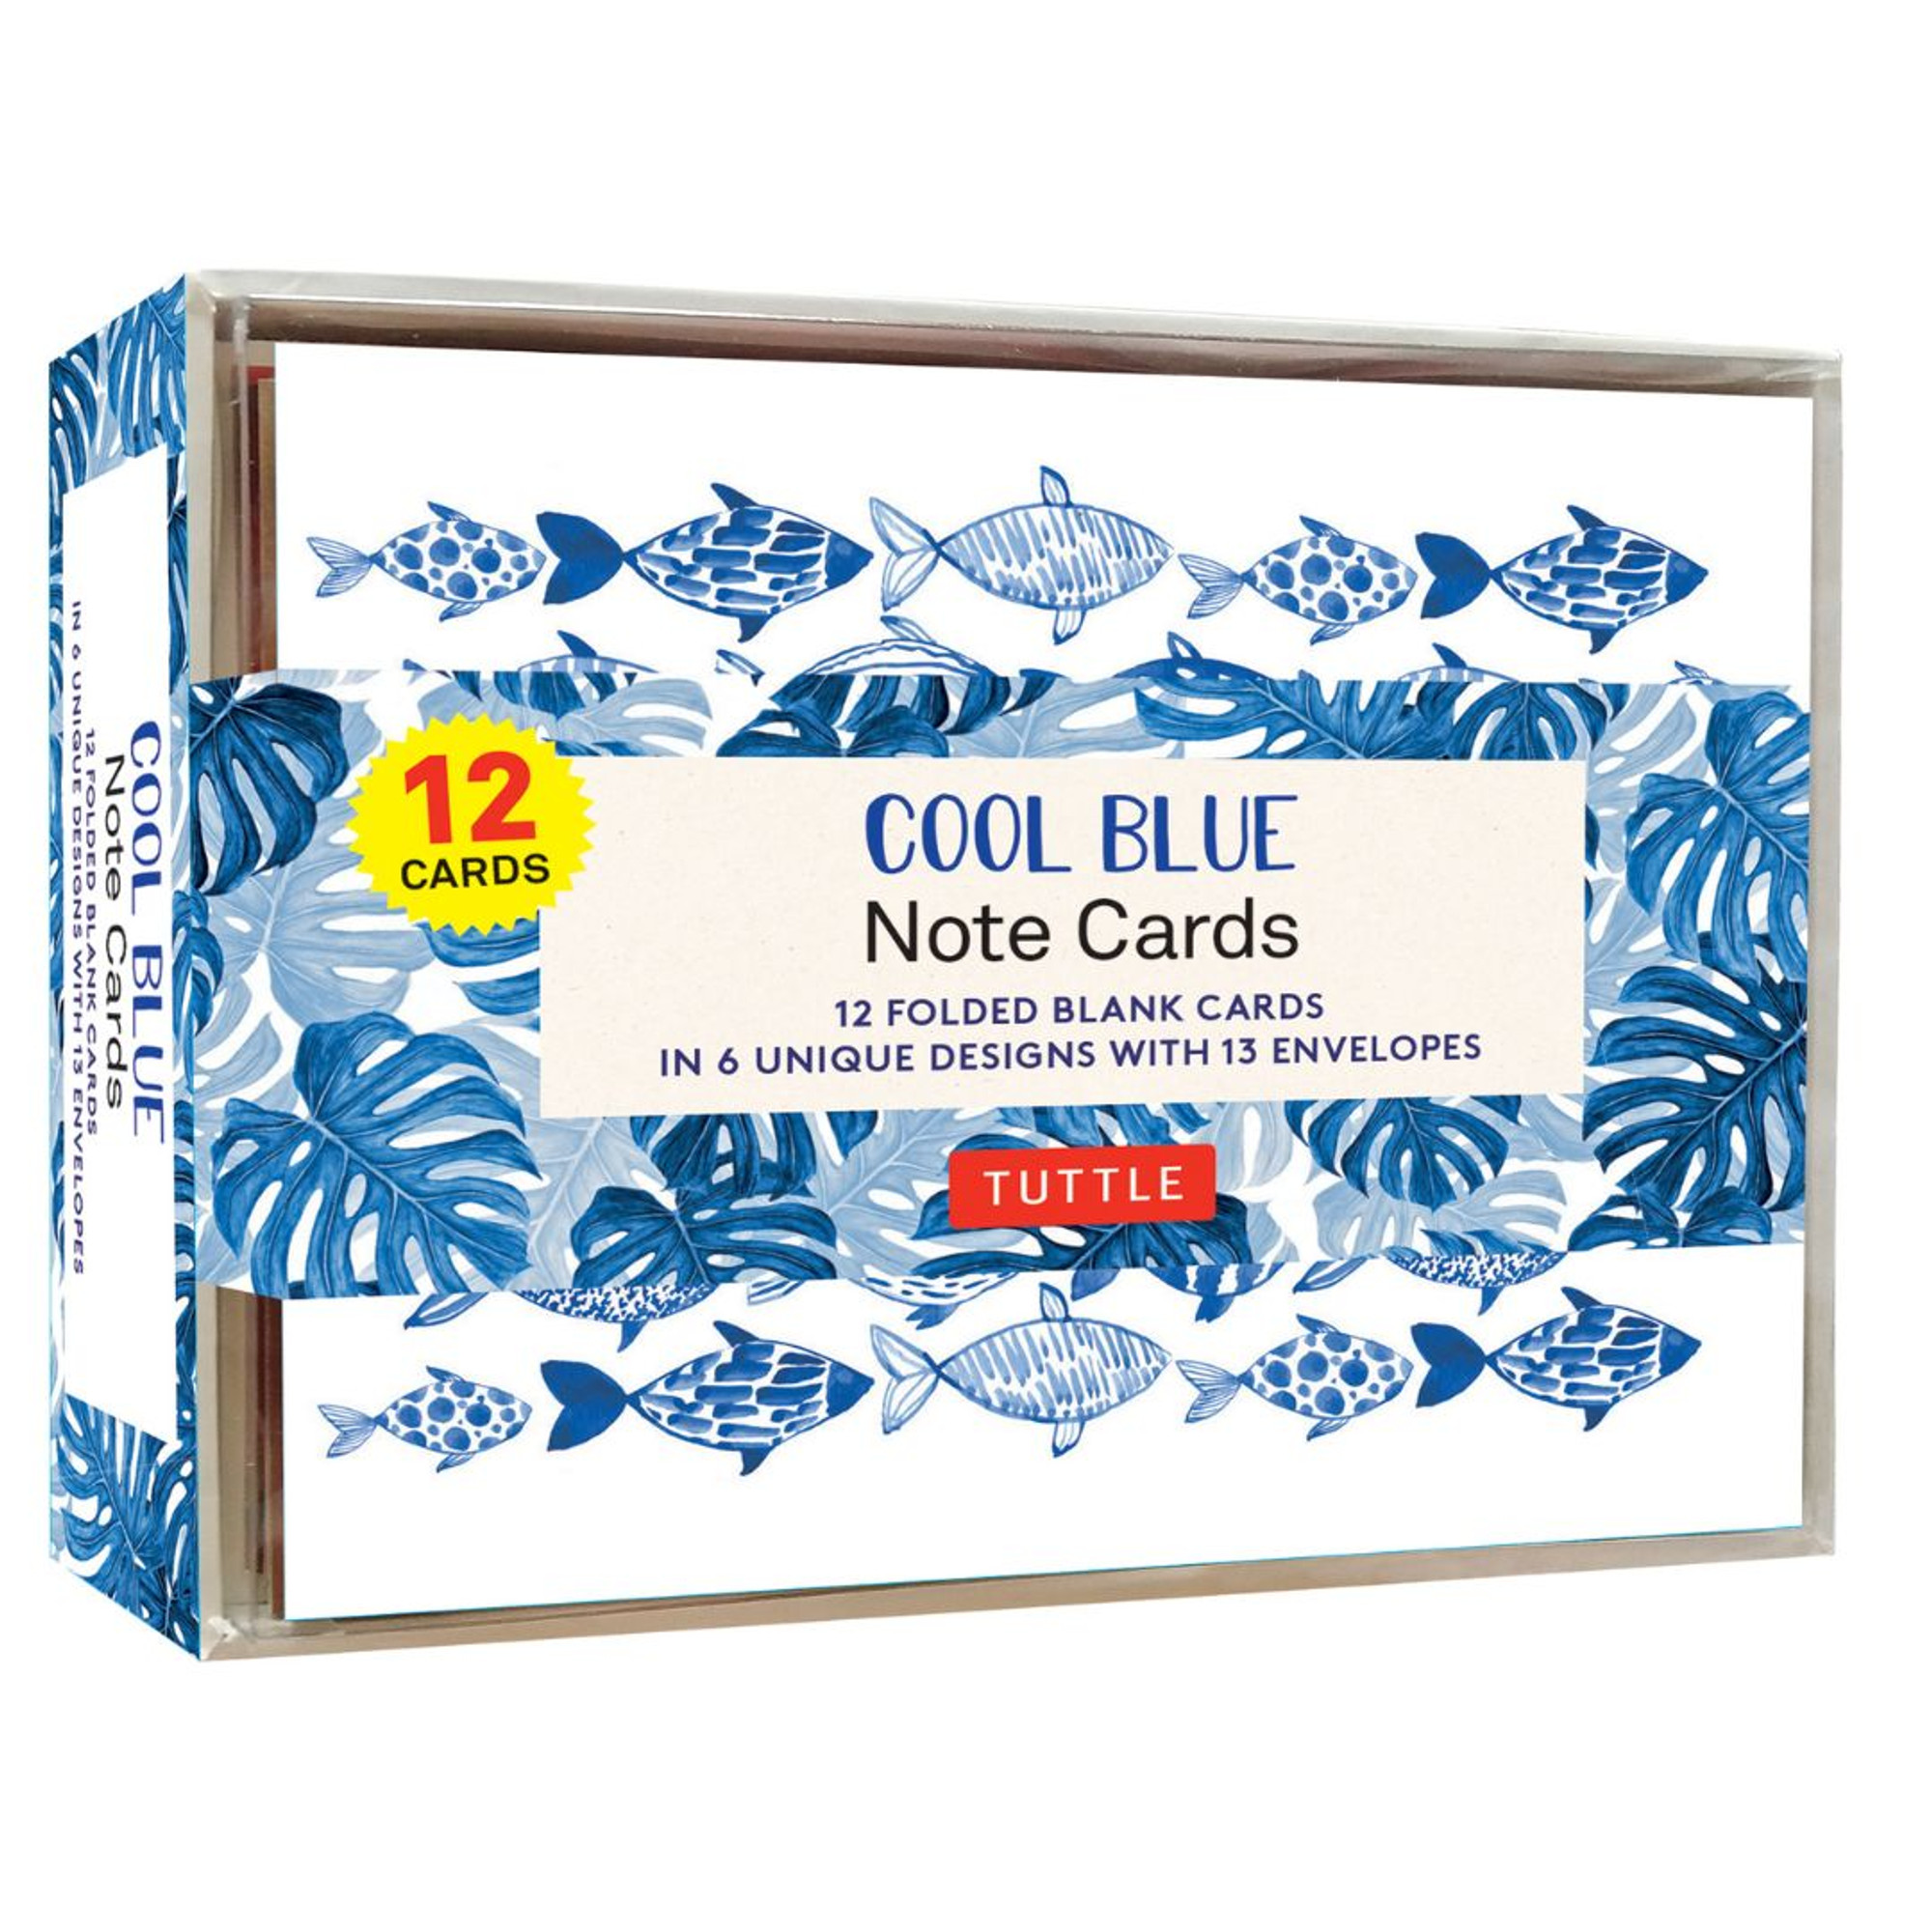 Cool Blue Note Cards - 12 Cards (9780804854832) - Tuttle Publishing